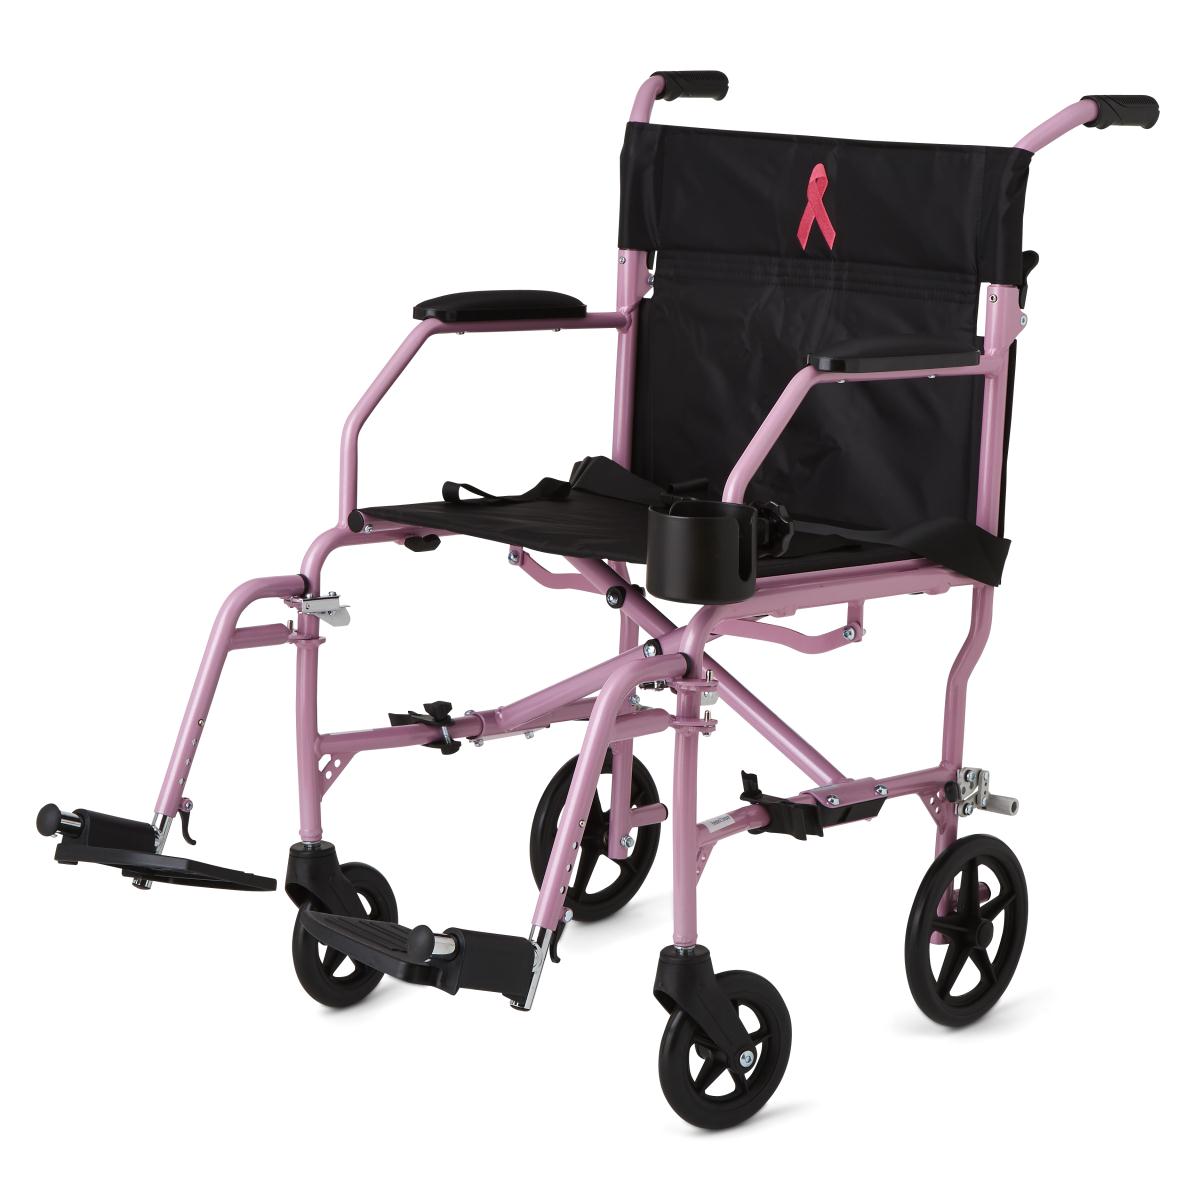 1 Each-Each / Pink / 6.00 IN Patient Safety & Mobility - MEDLINE - Wasatch Medical Supply